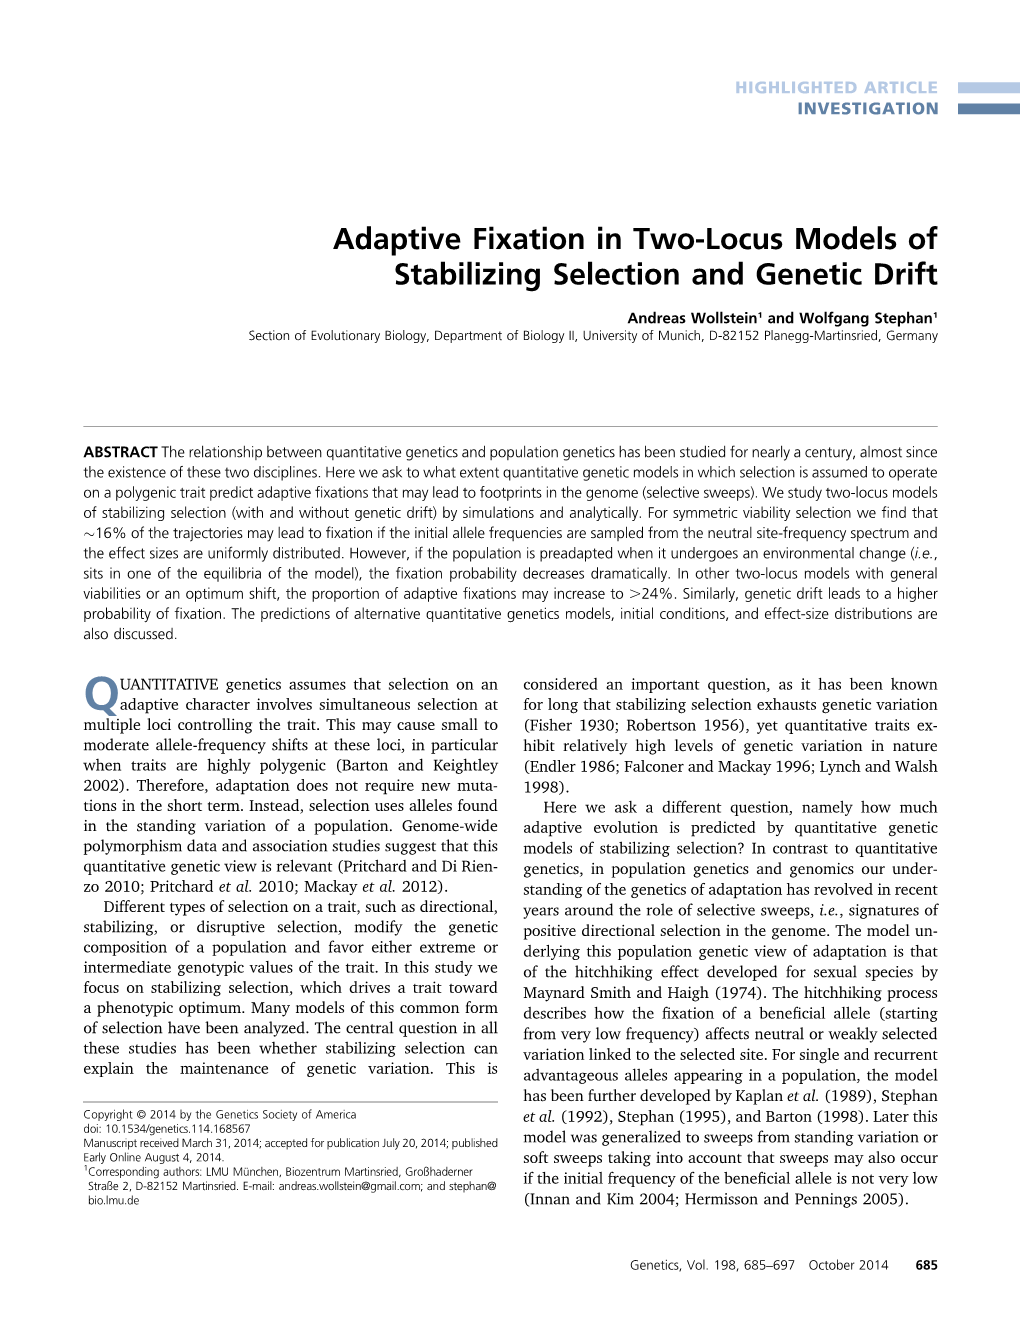 Adaptive Fixation in Two-Locus Models of Stabilizing Selection and Genetic Drift